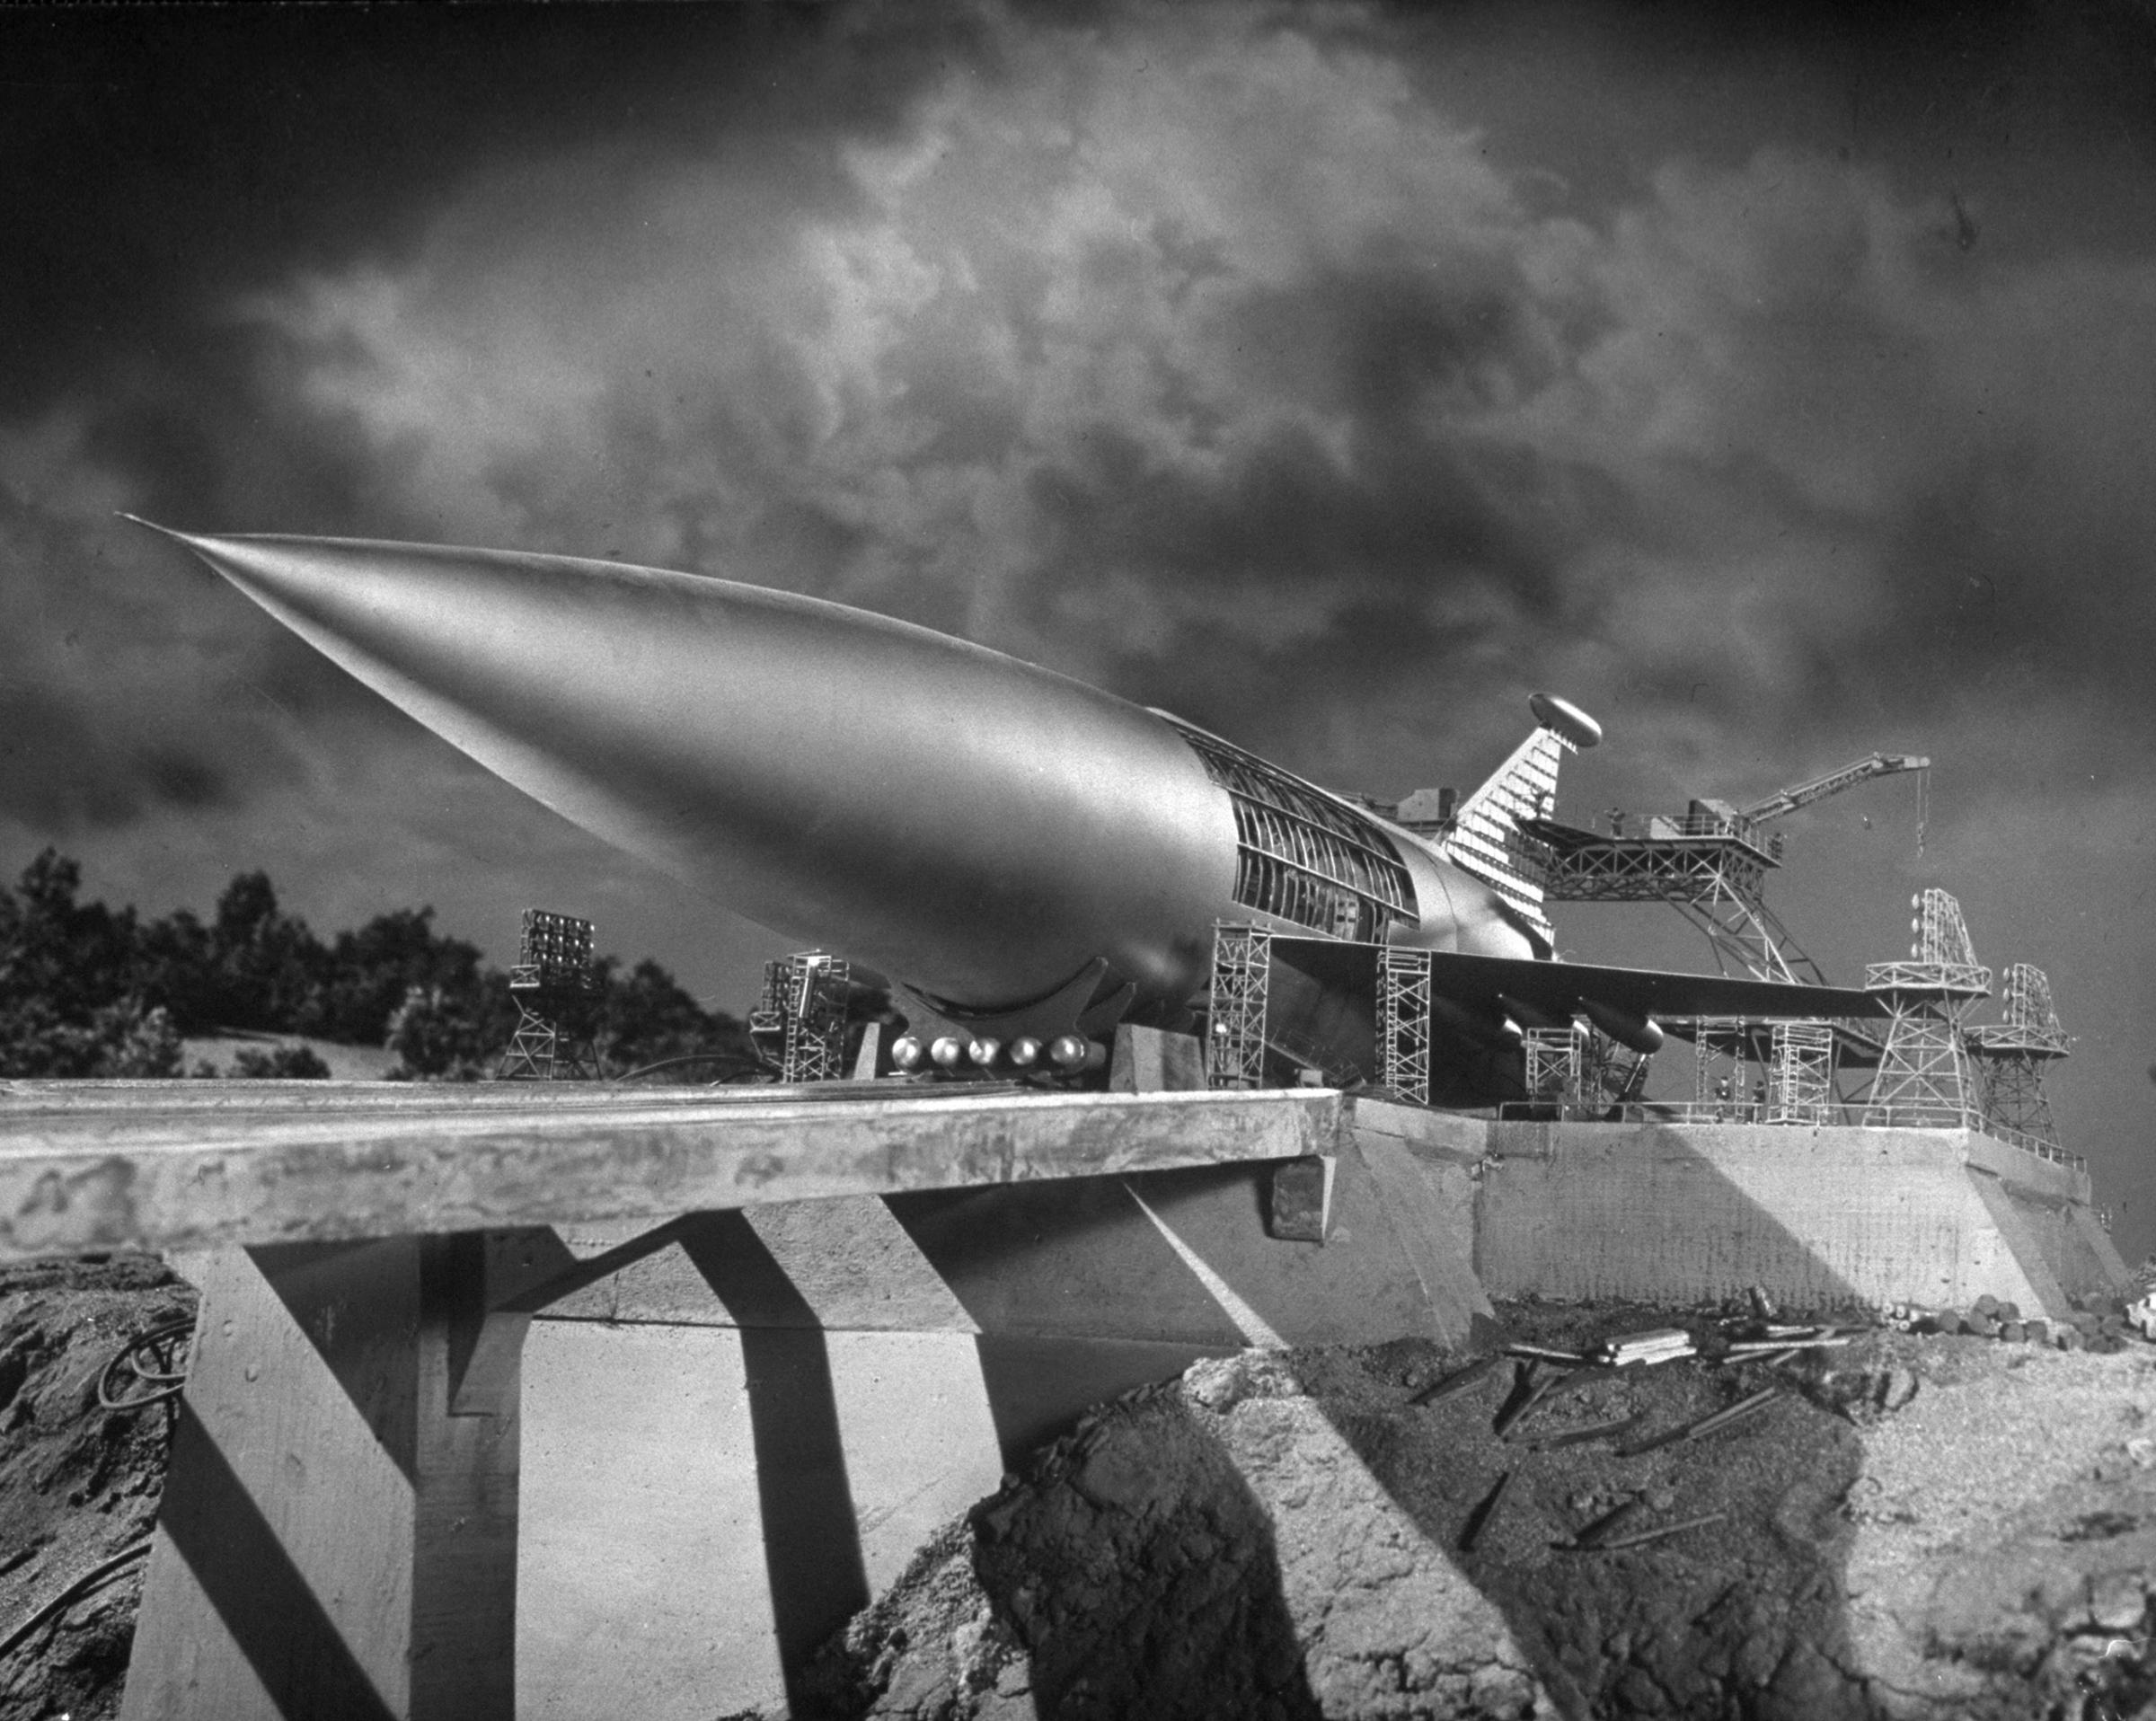 Model of the "Space Ark" rocket ship from the sci-fi classic, "When Worlds Collide" 1951